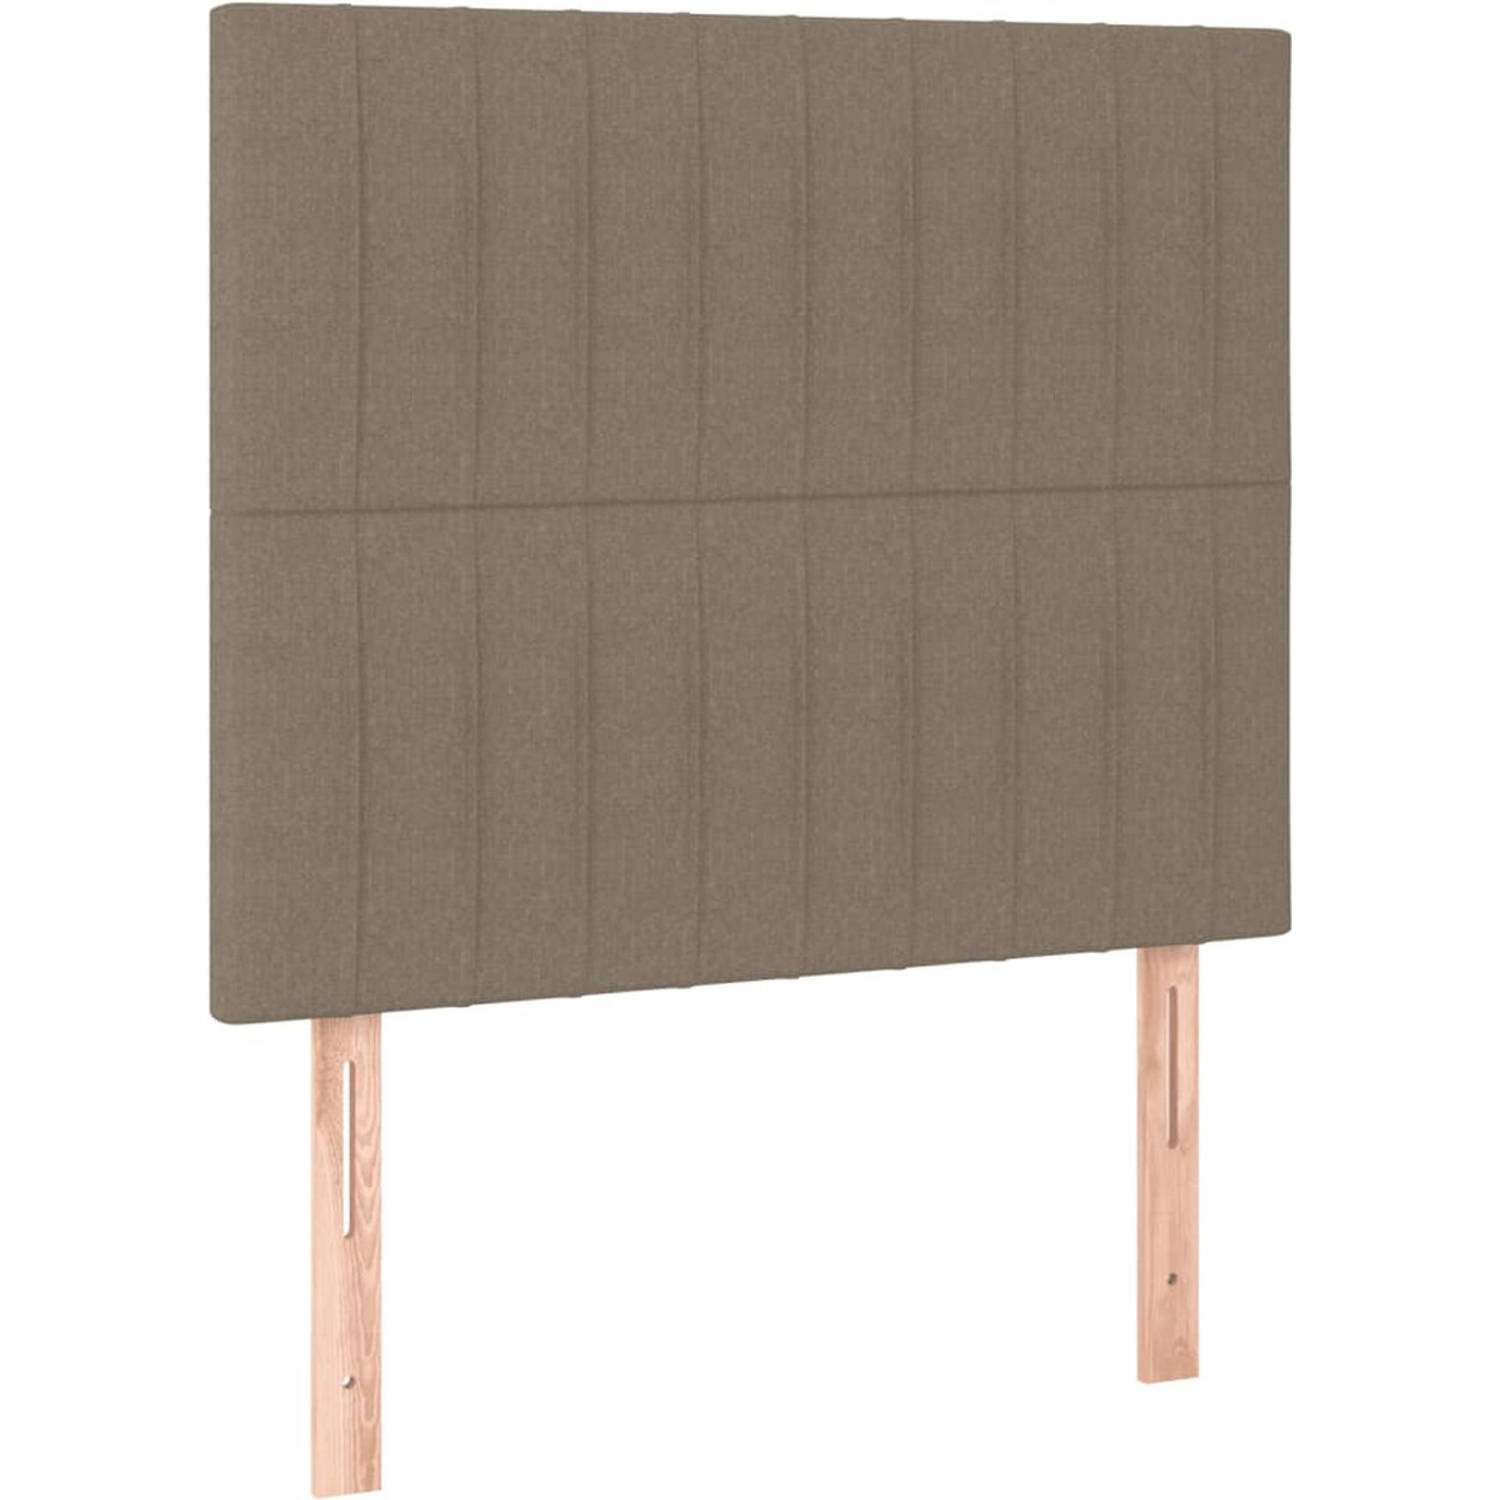 The Living Store Boxspringbed - Pocketvering - 80 x 200 cm - Taupe